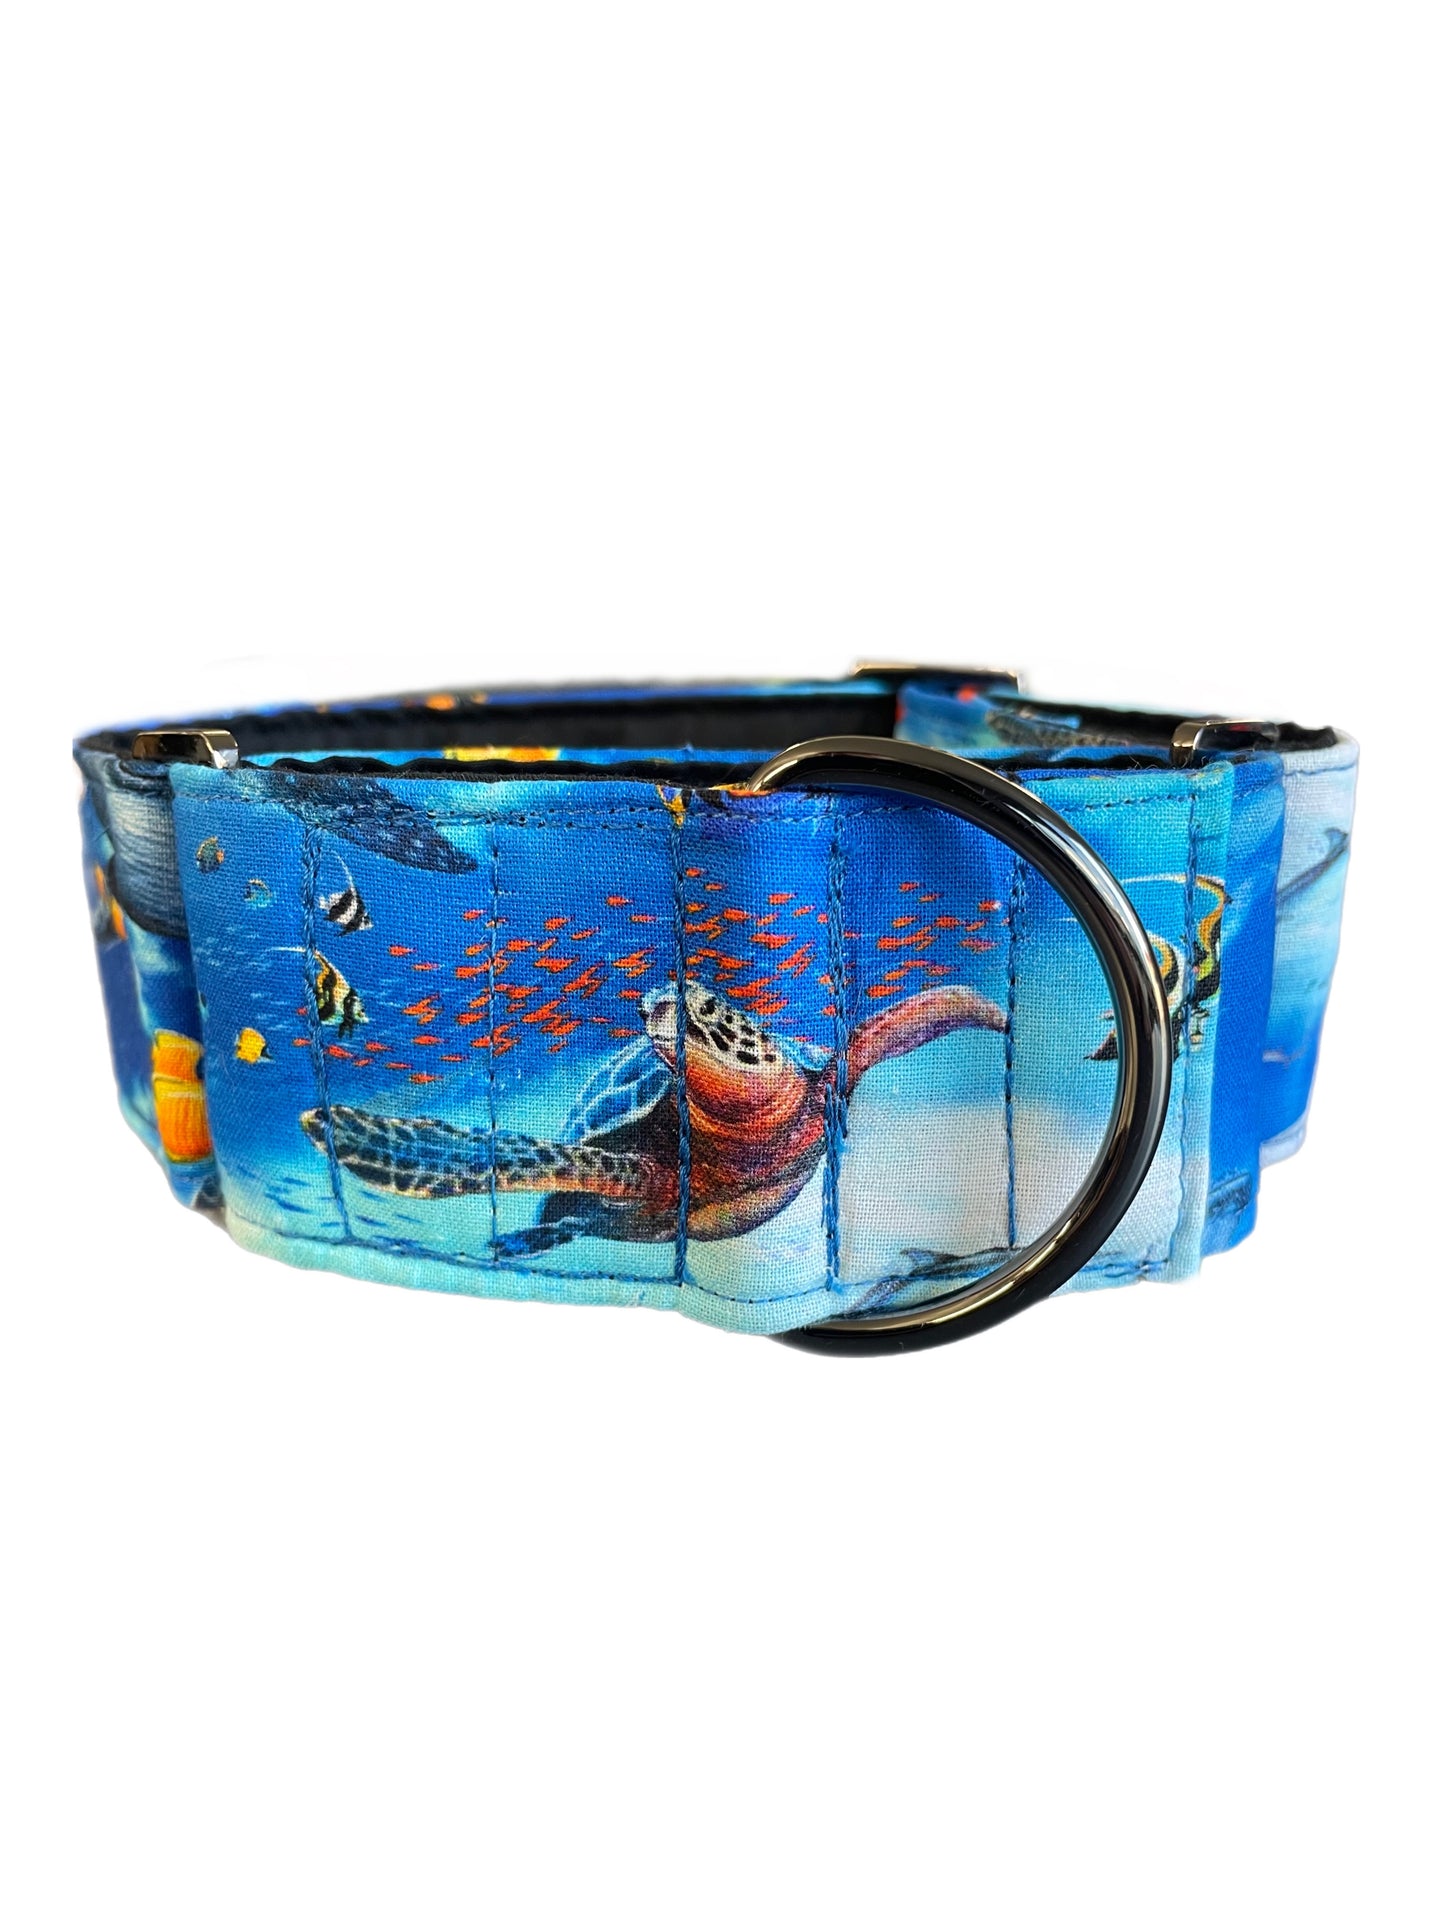 Marine life Greyhound Martingale collar dolphins turtle fish cotton covered 50mm width super soft